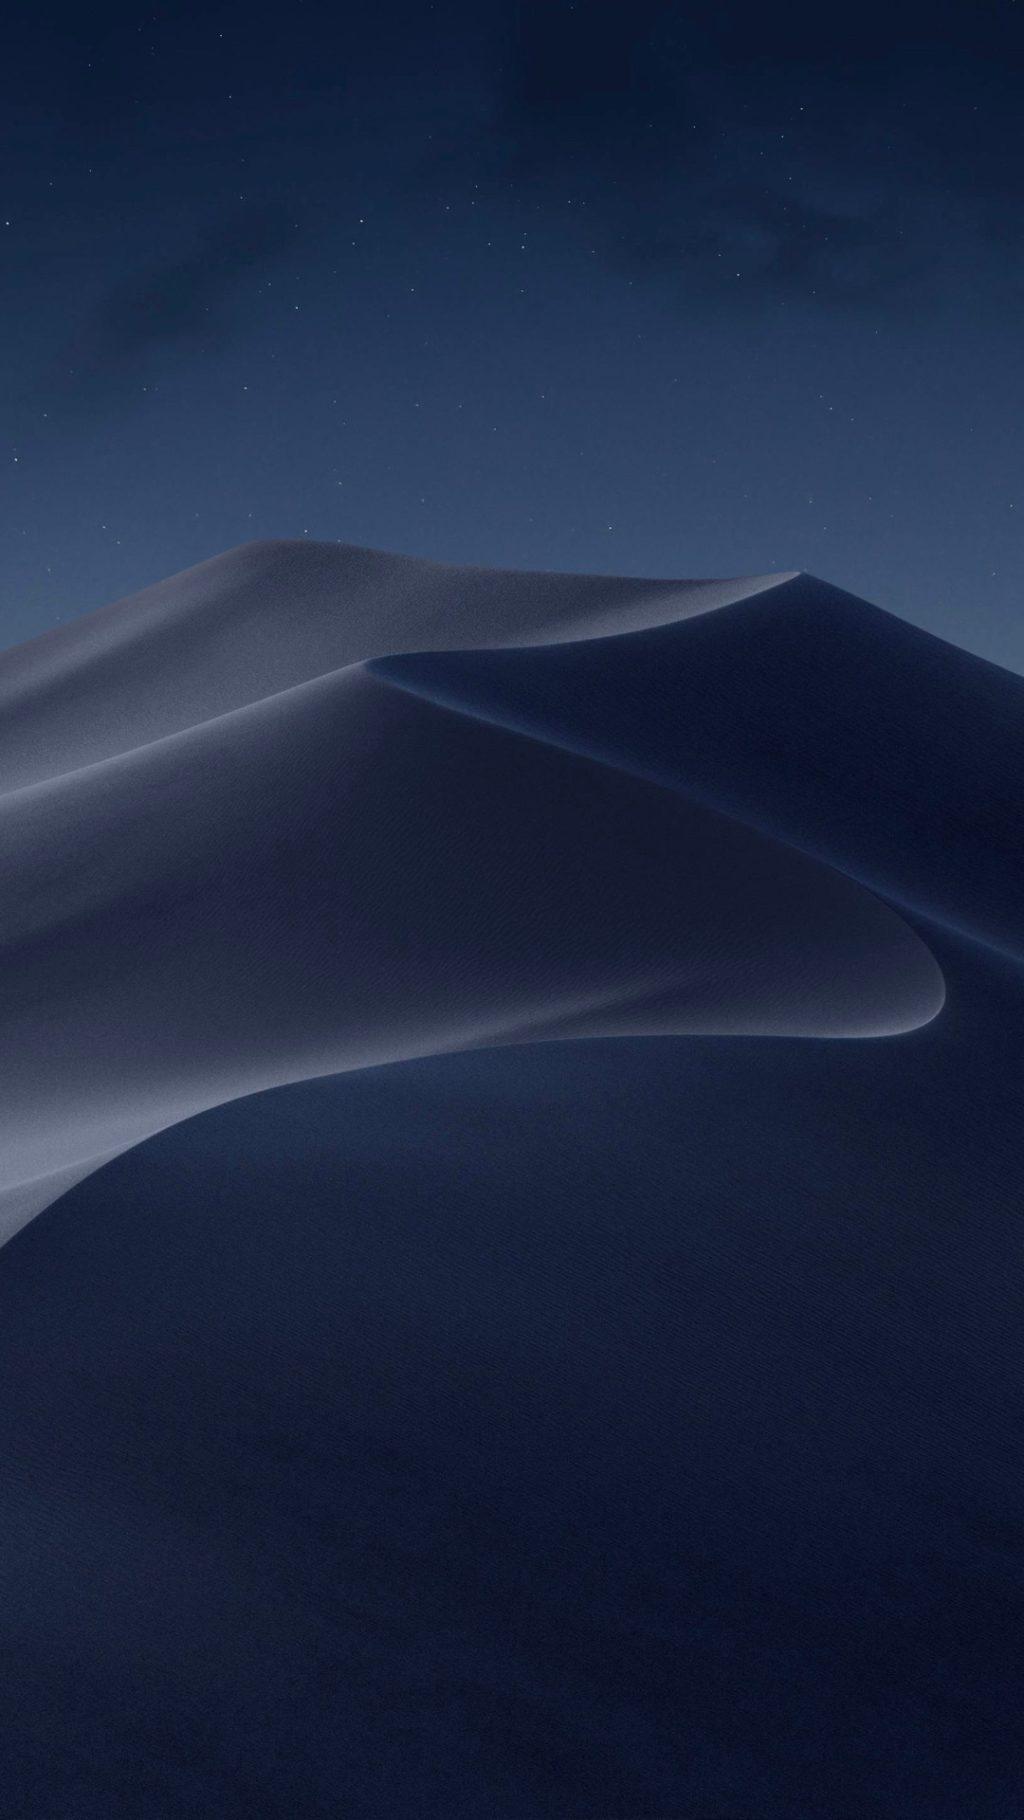 Wallpaper Wednesday: macOS Mojave Wallpaper for iPhone